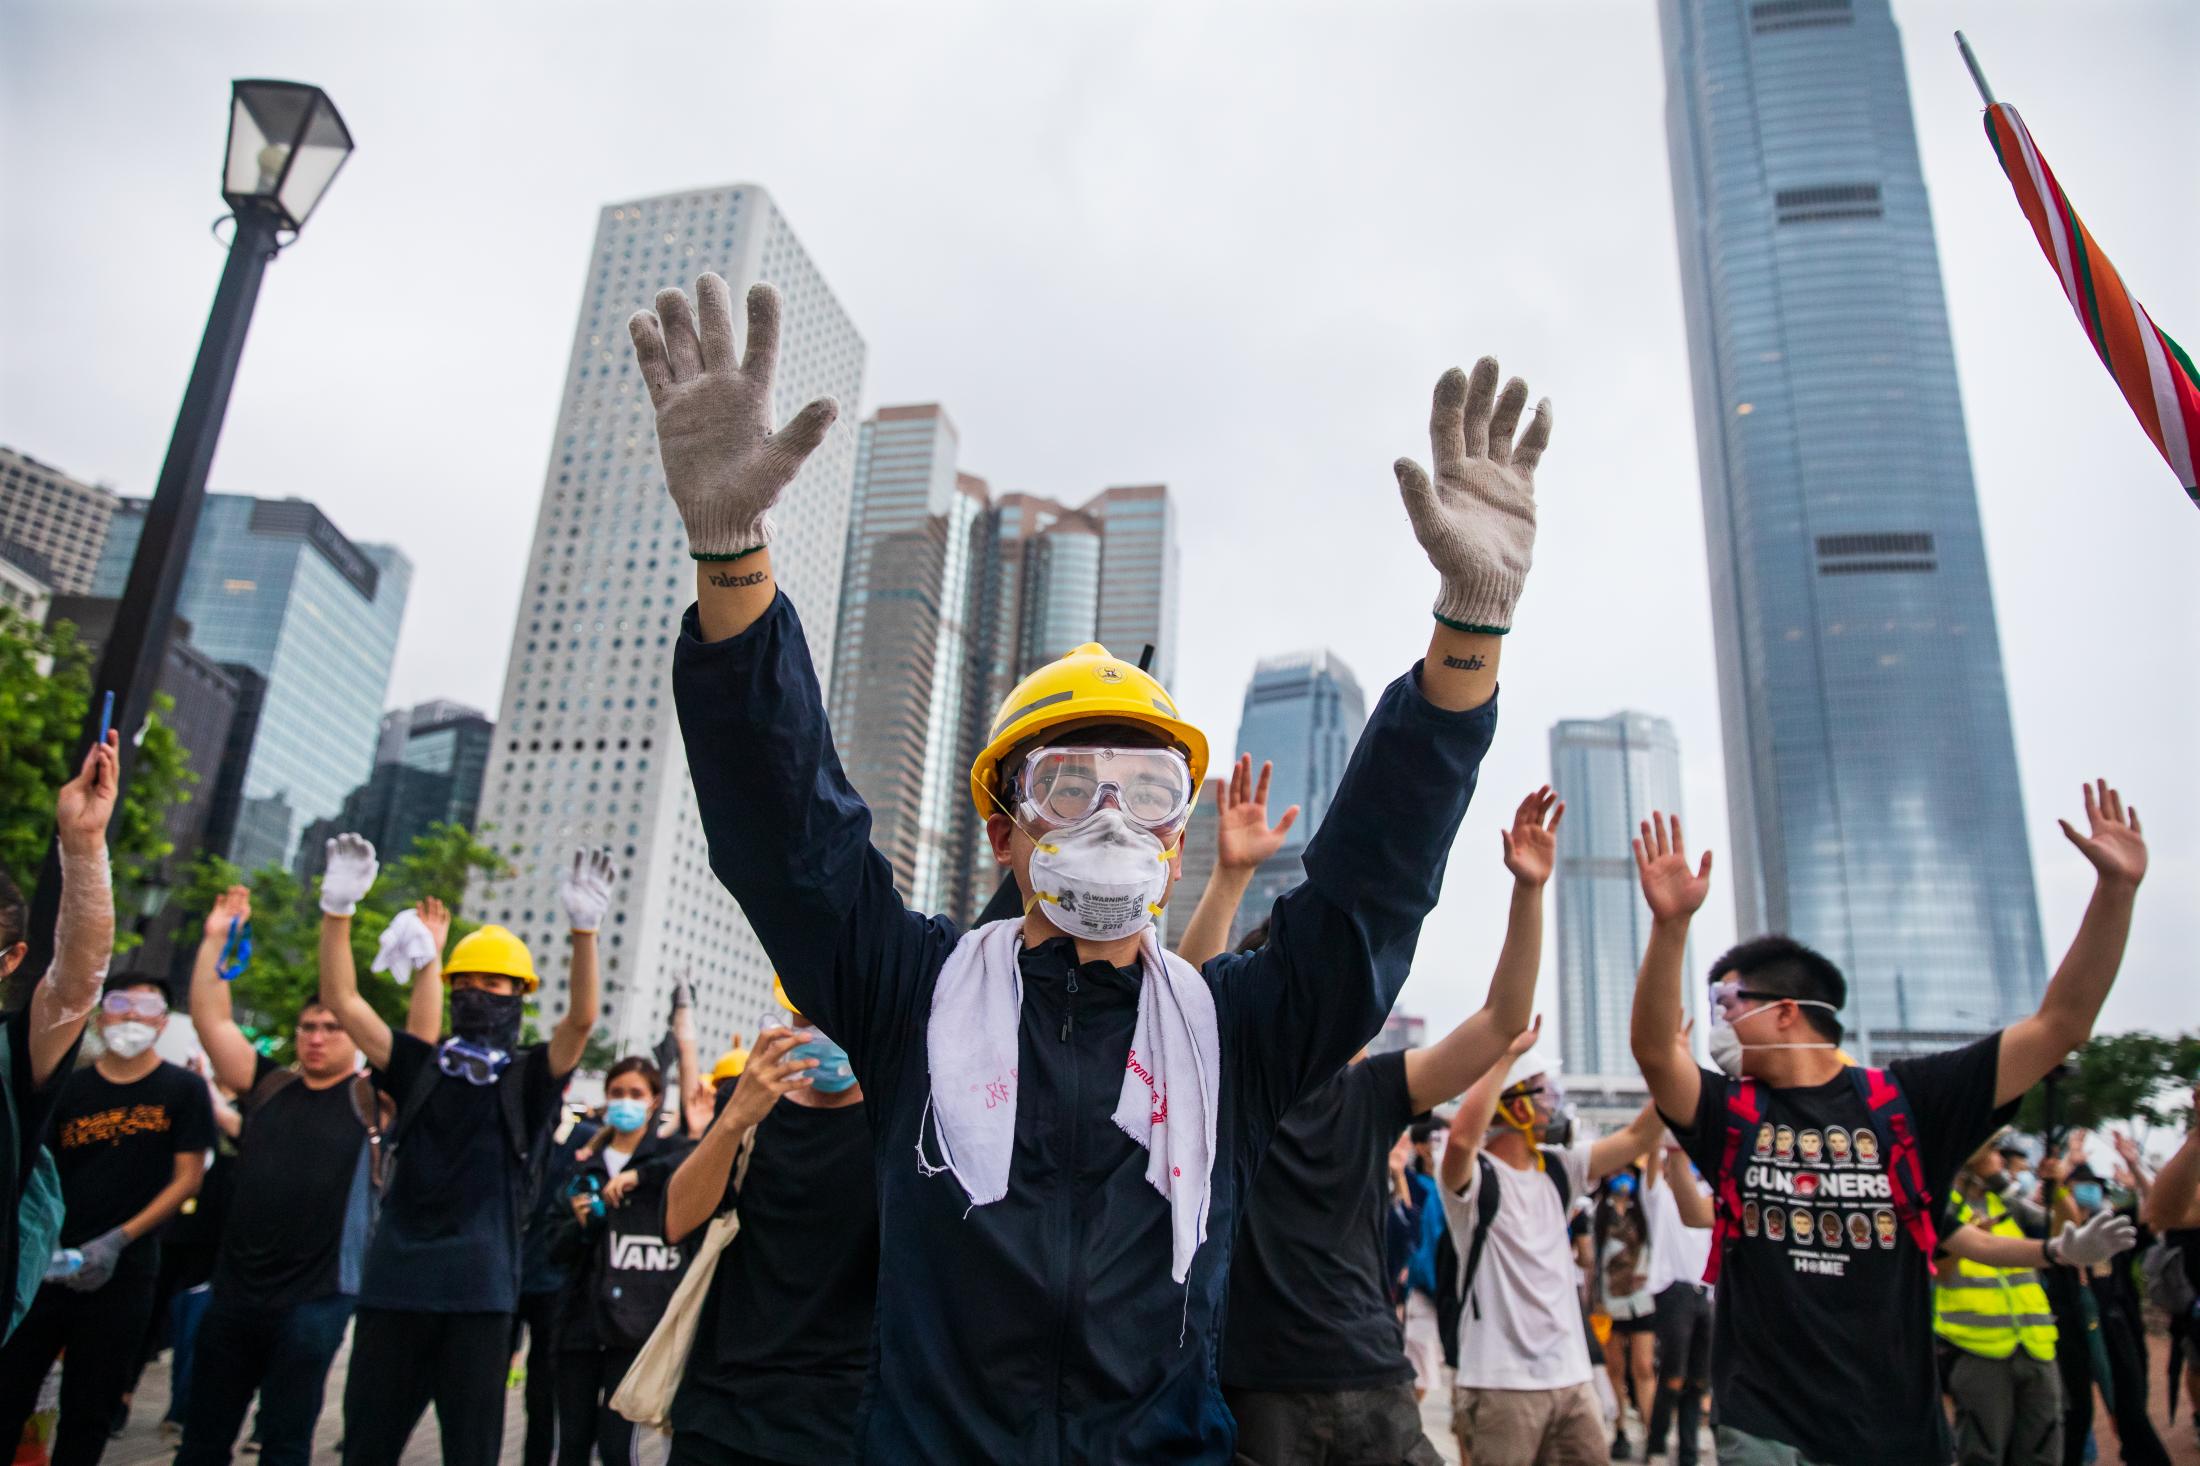  Protesters raise their hands at the police. On June 12, there were about half a million people on the streets in a protest that surrounded LegCo to prevent deputies from entering to discuss the extradition bill. Law enforcement officials respond with batons, pepper spray and tear gas to disperse the protesters. 